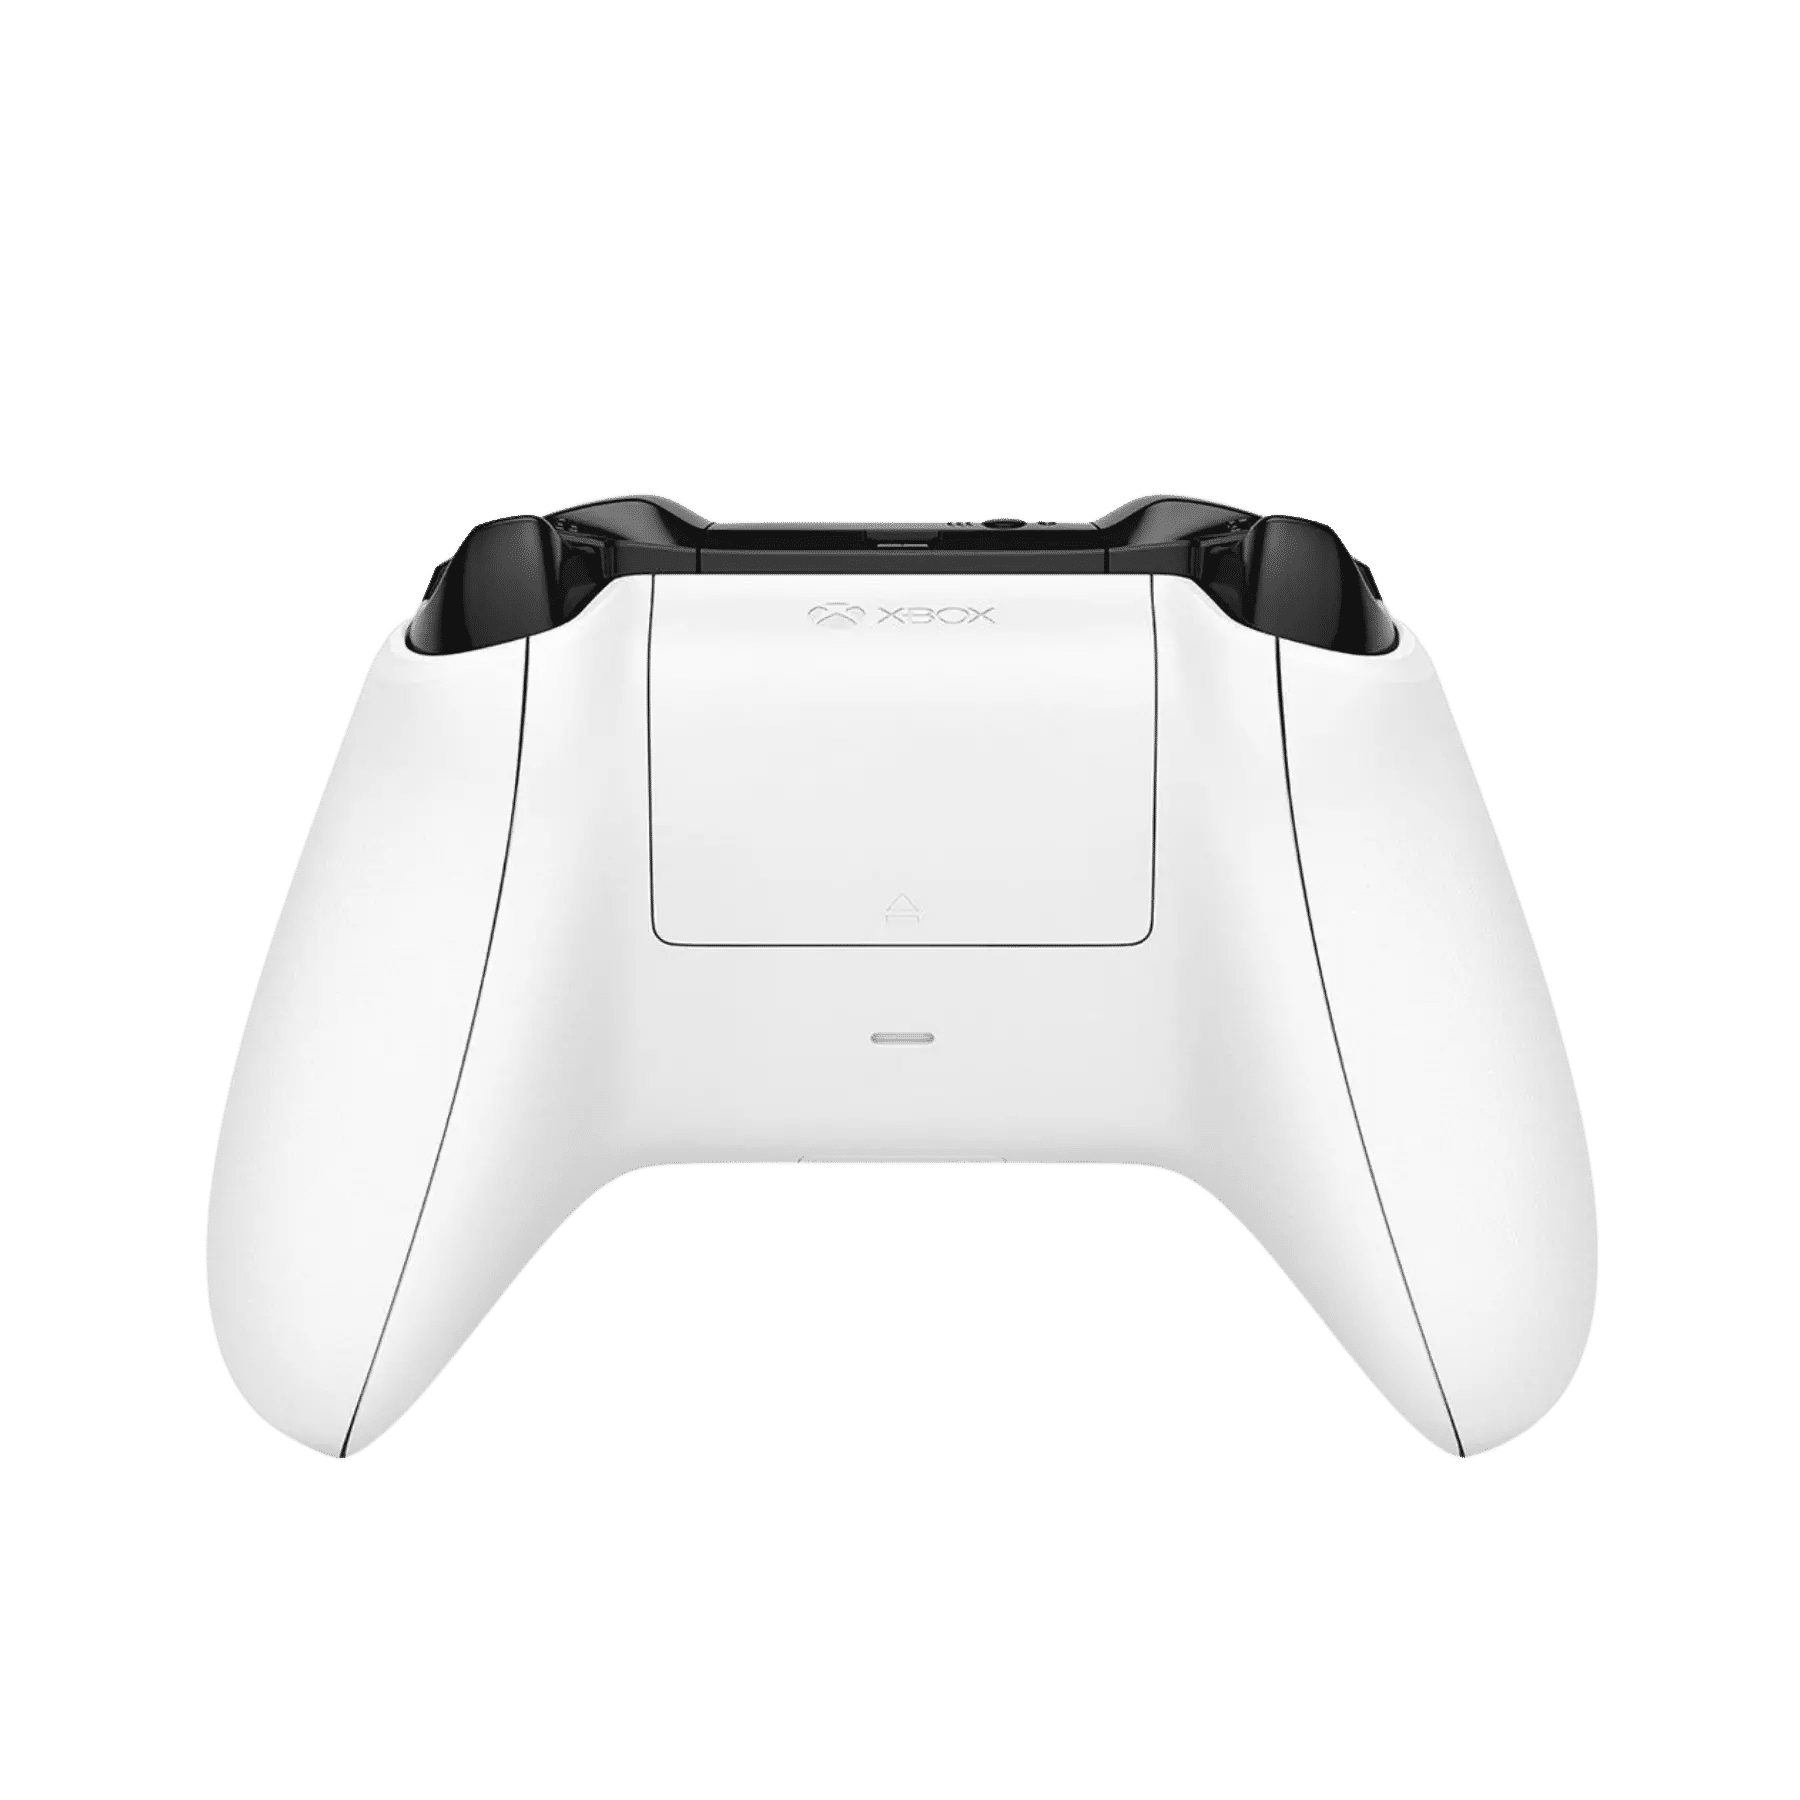 These are product images of Xbox Controller on rent by SharePal in Bangalore.